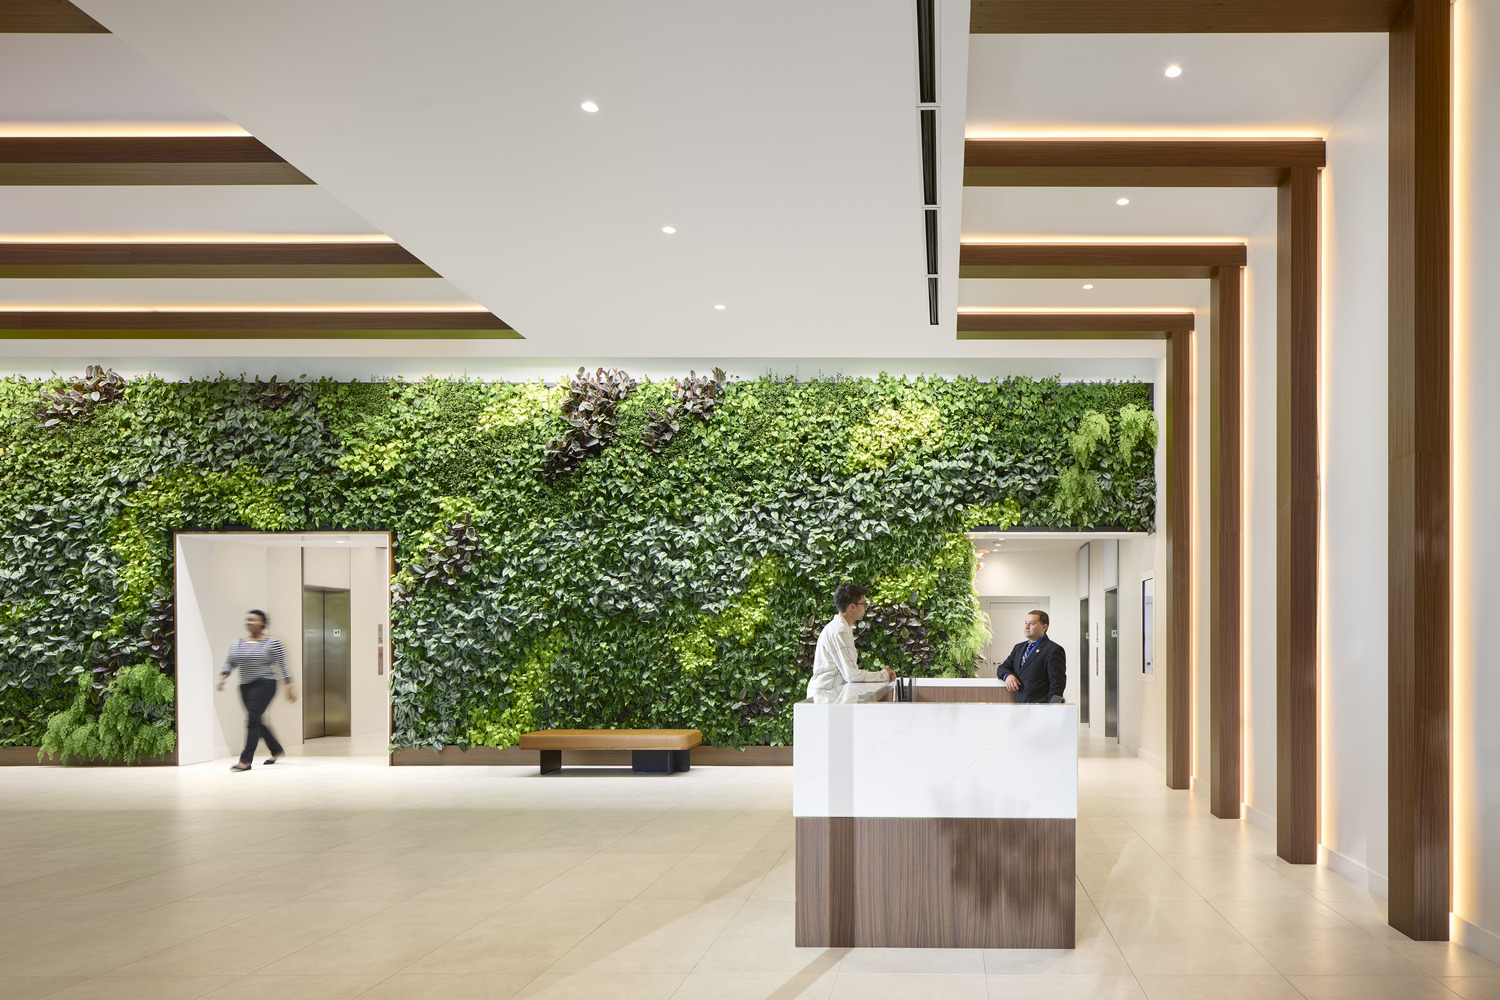 What You Need to Know About Biophilic Design